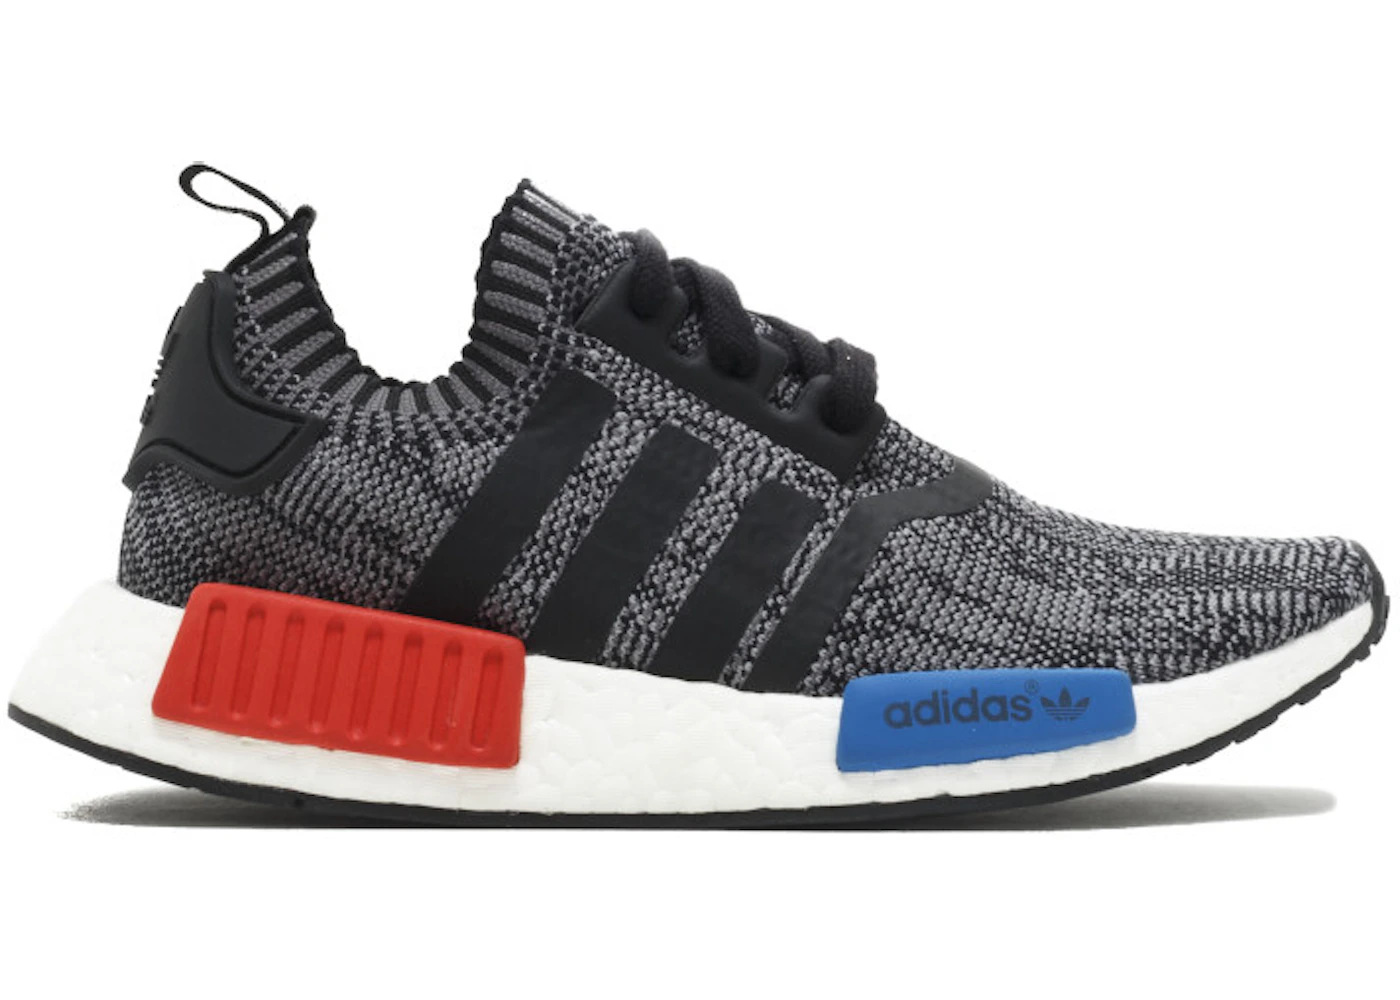 adidas NMD R1 Primeknit Friends and Family N00001 - US